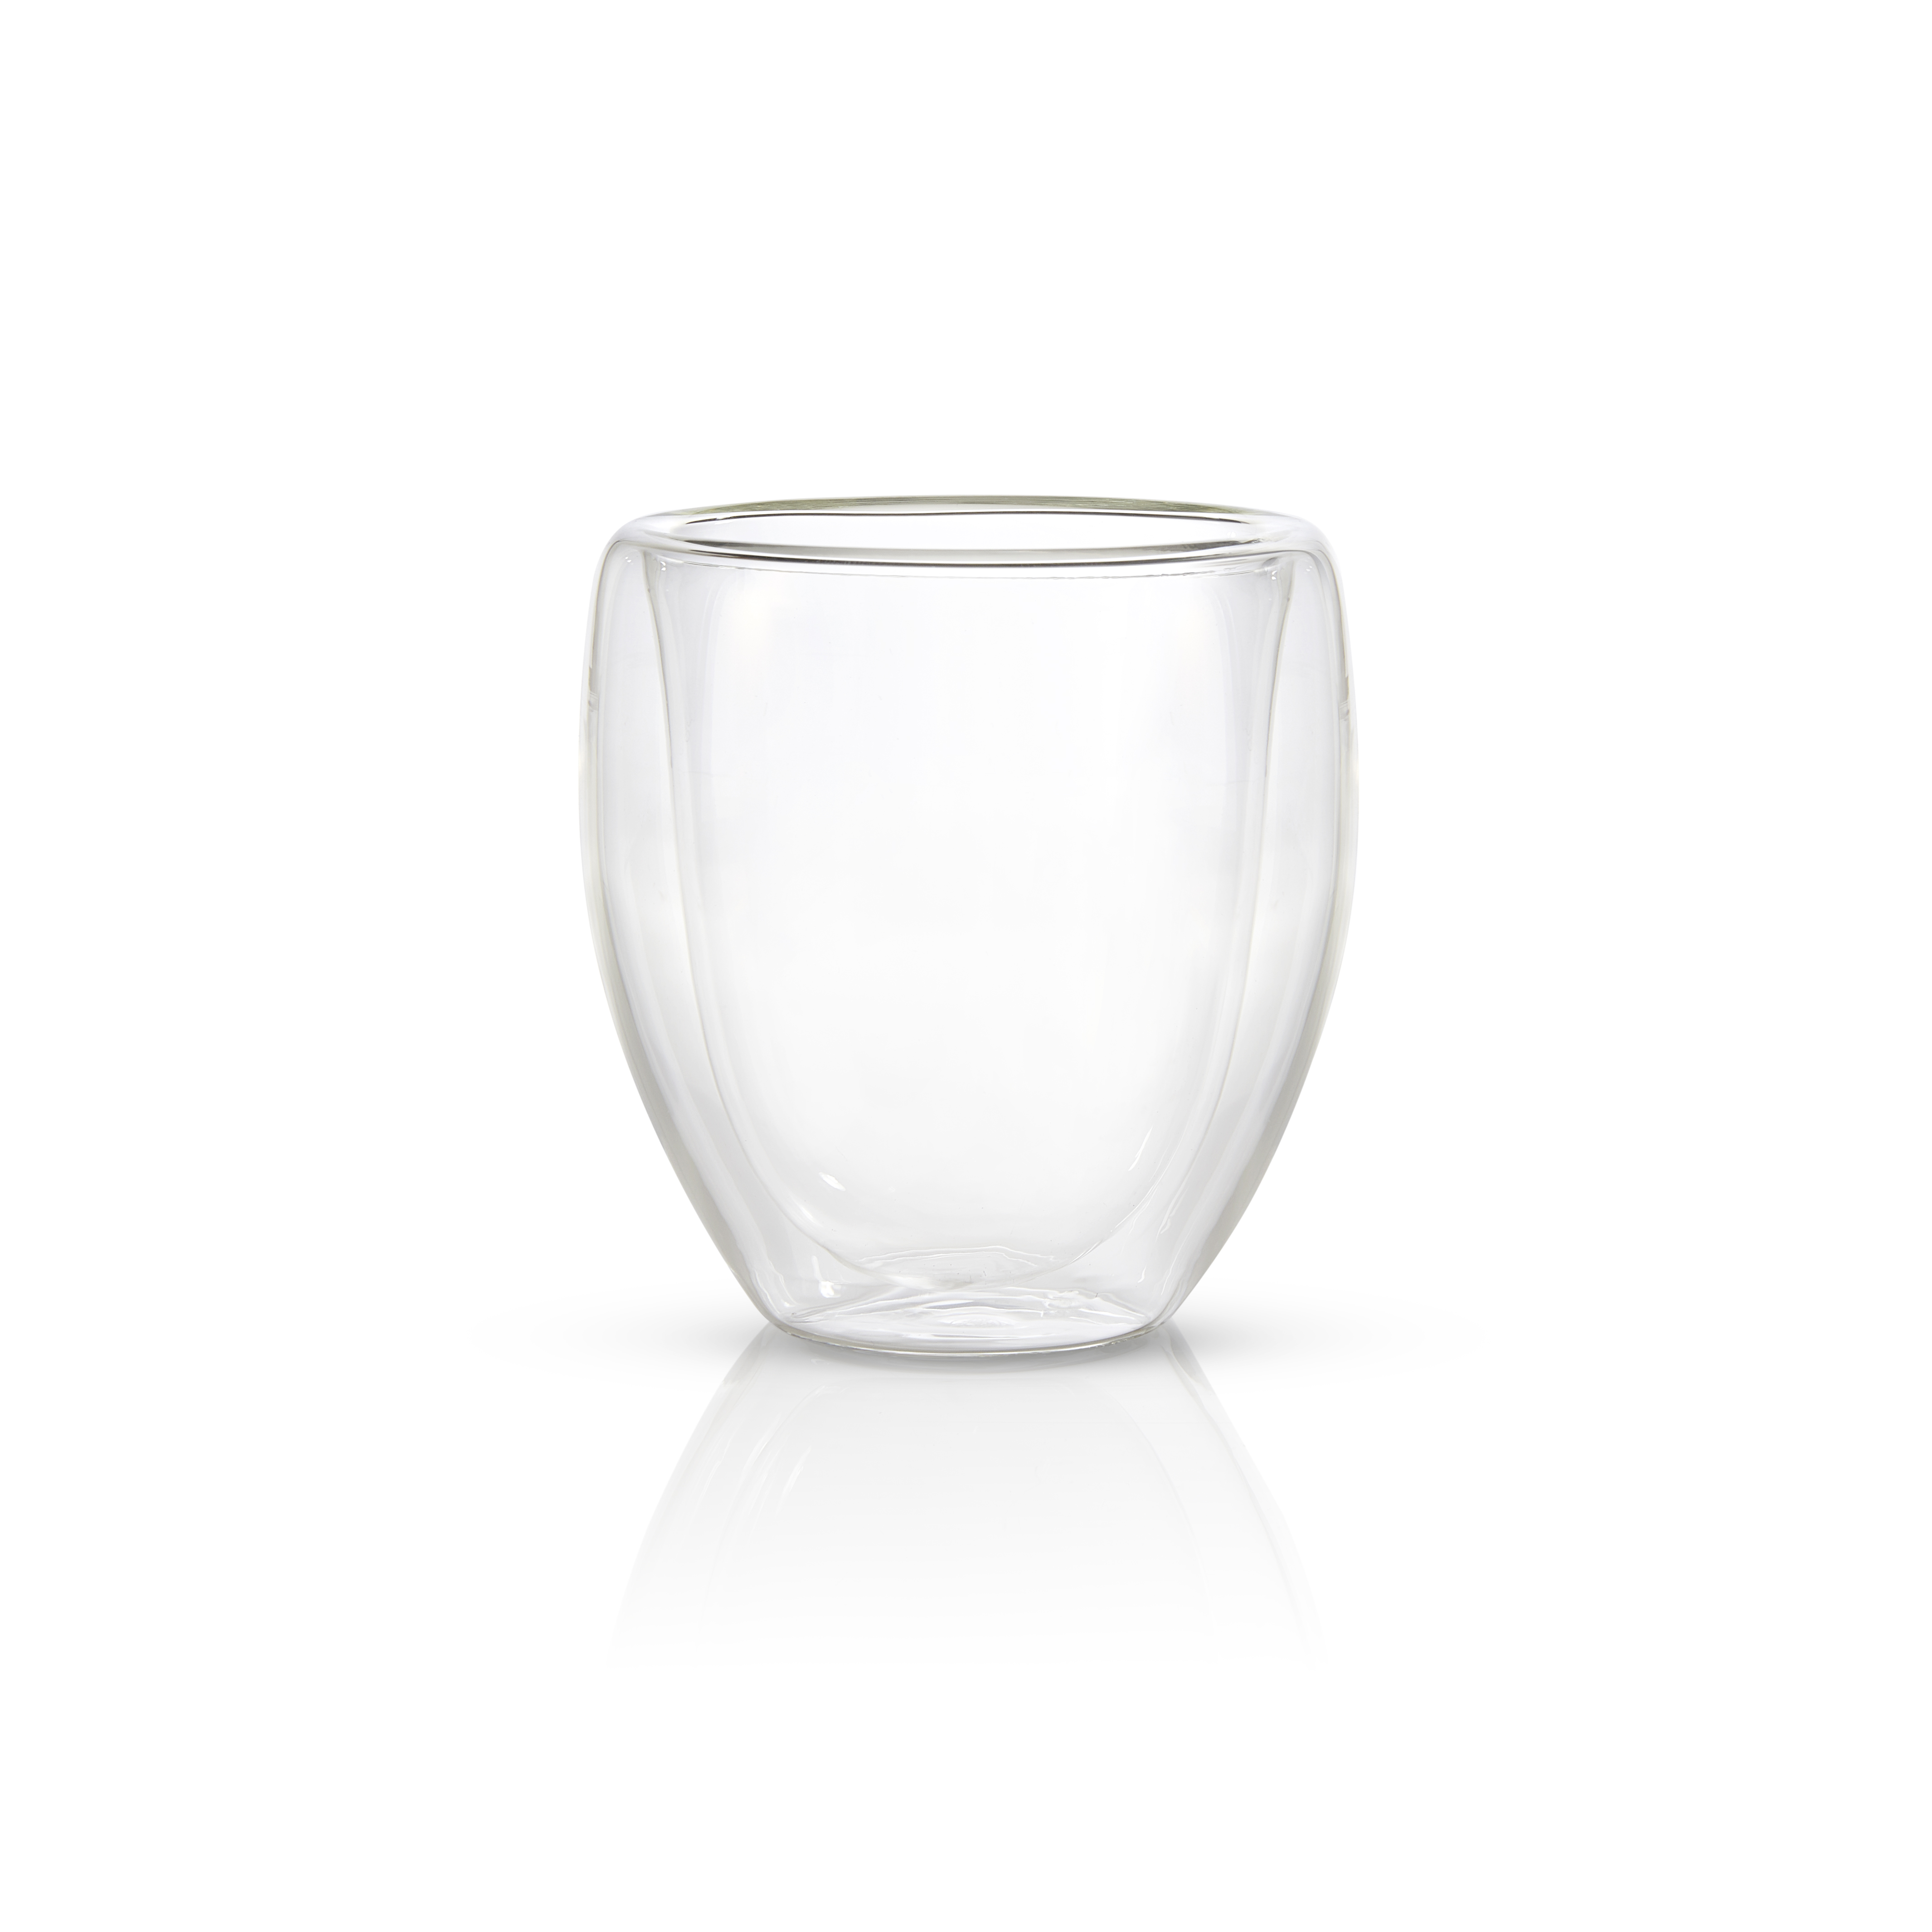 Double Walled Thermo Glass 200ml - set of 2